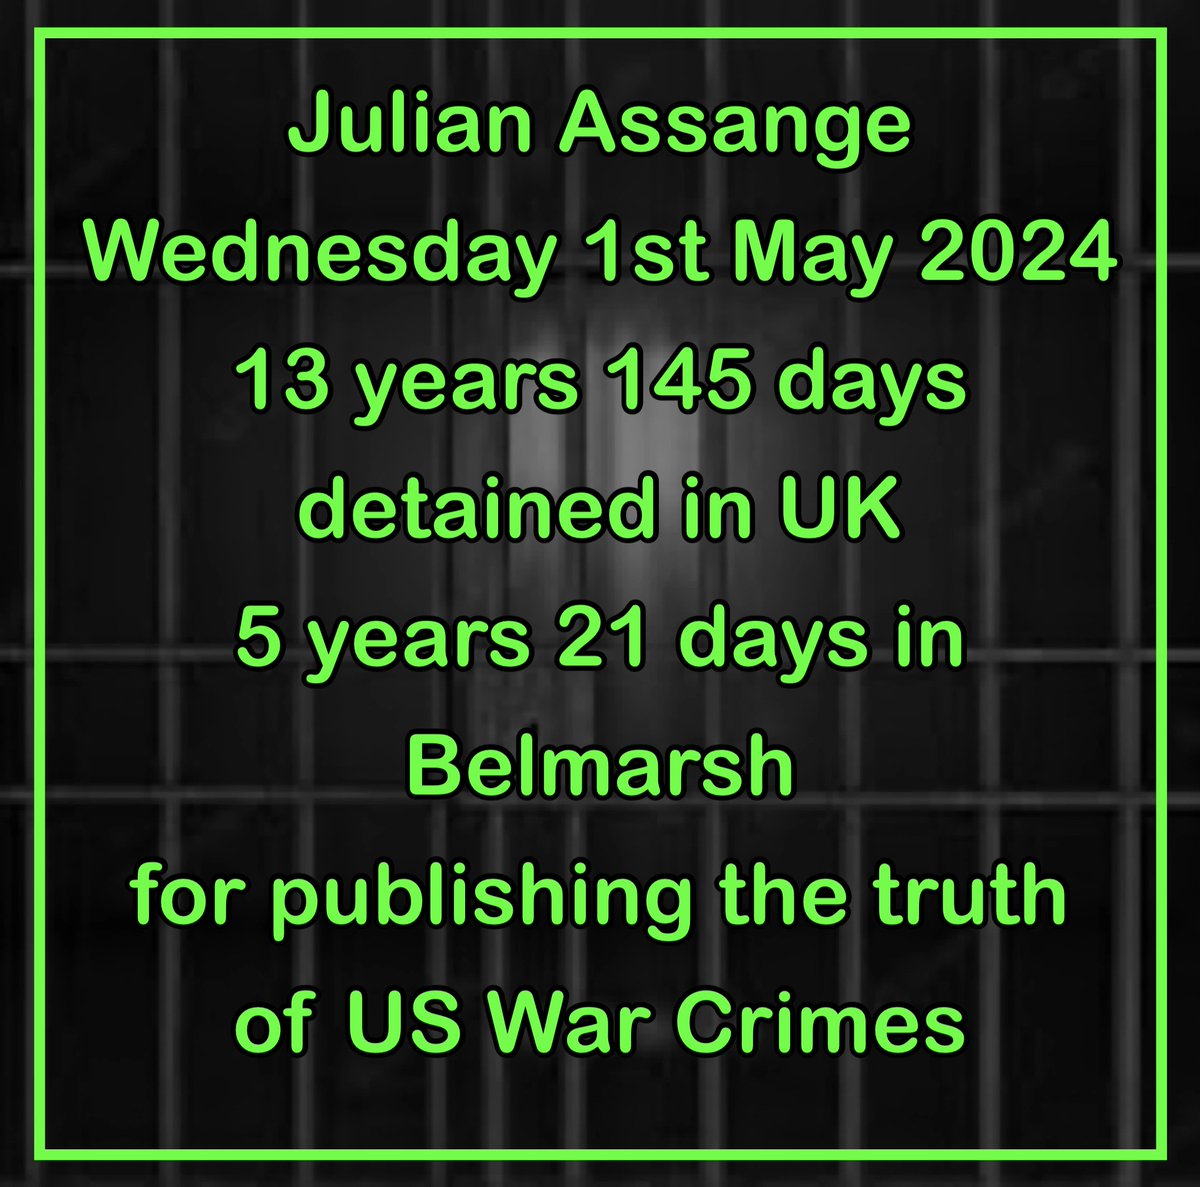 ALT=embedded text only 'Julian Assange Wednesday 1st May 2024,13 years 145 days detained in UK,5 years 21 days in Belmarsh for publishing the truth of US War Crimes'